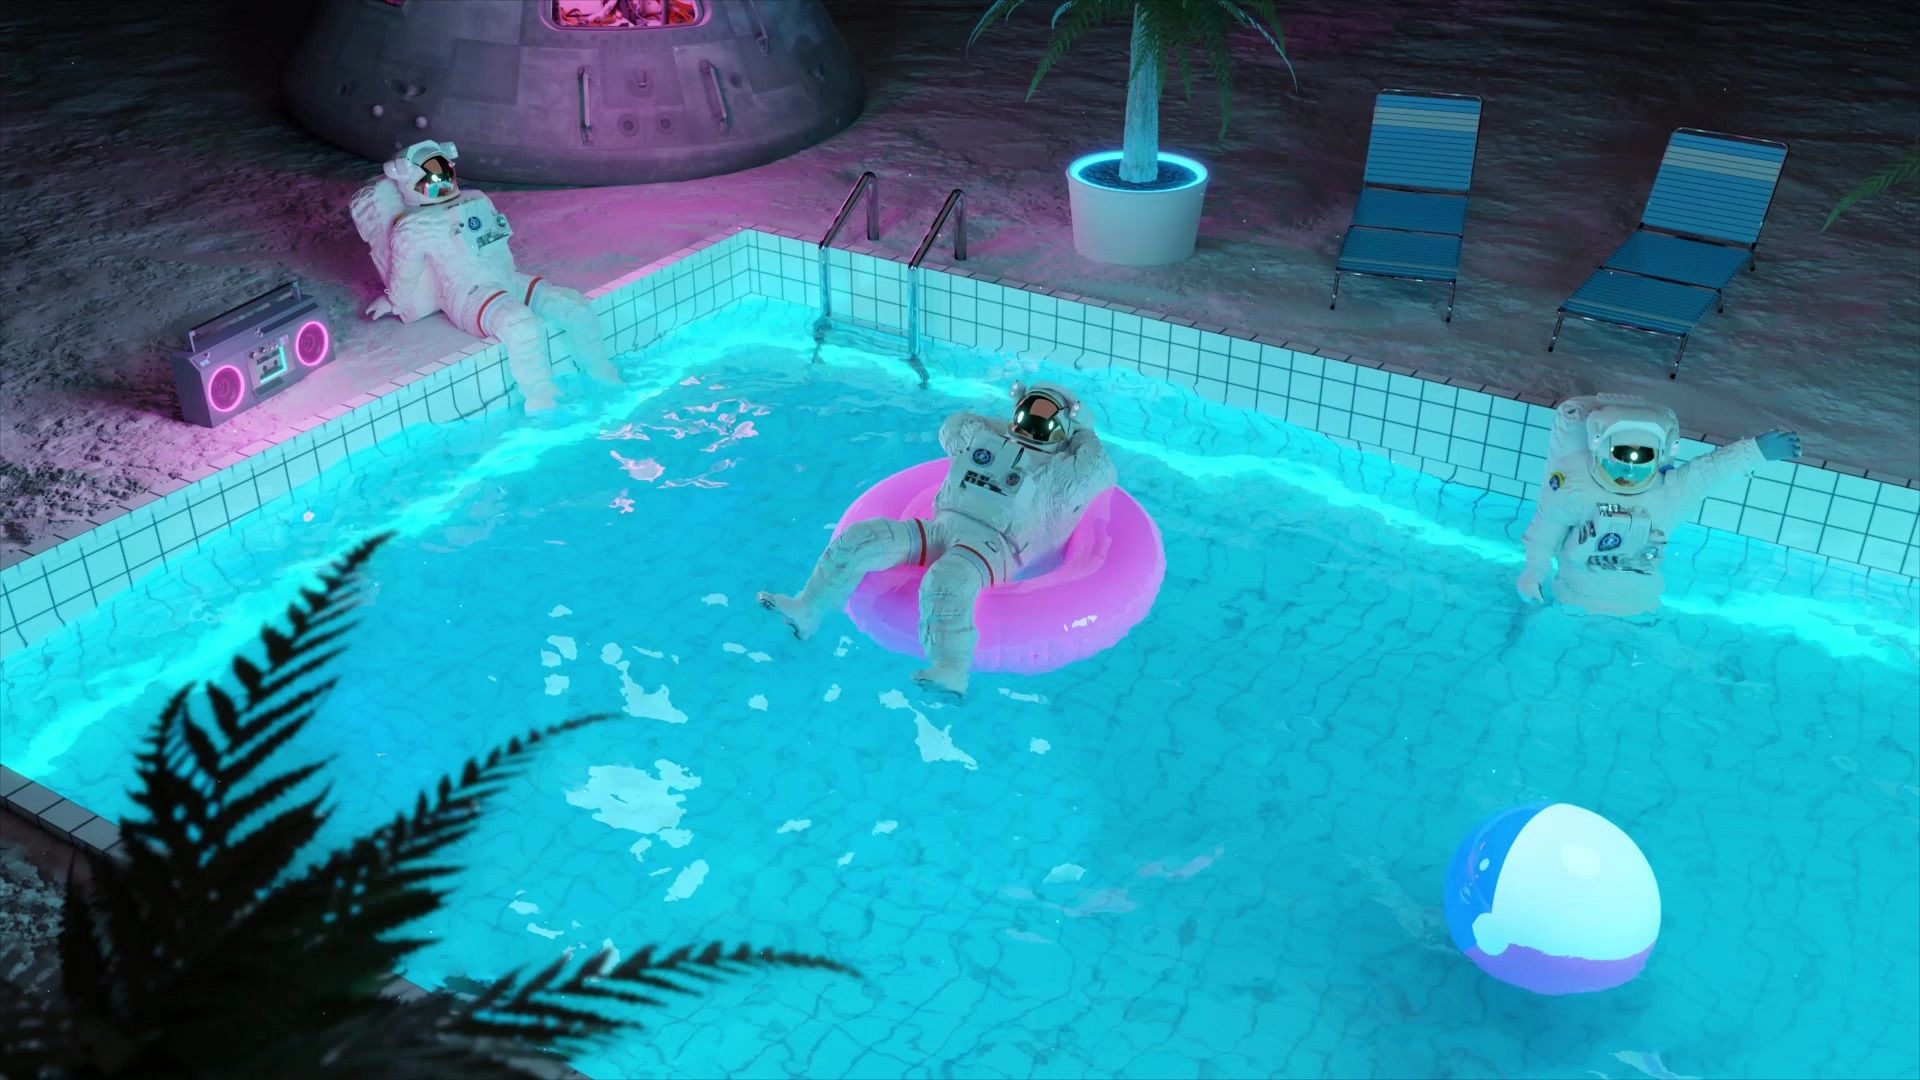 Astronauts Relaxing In The Pool Live Wallpaper